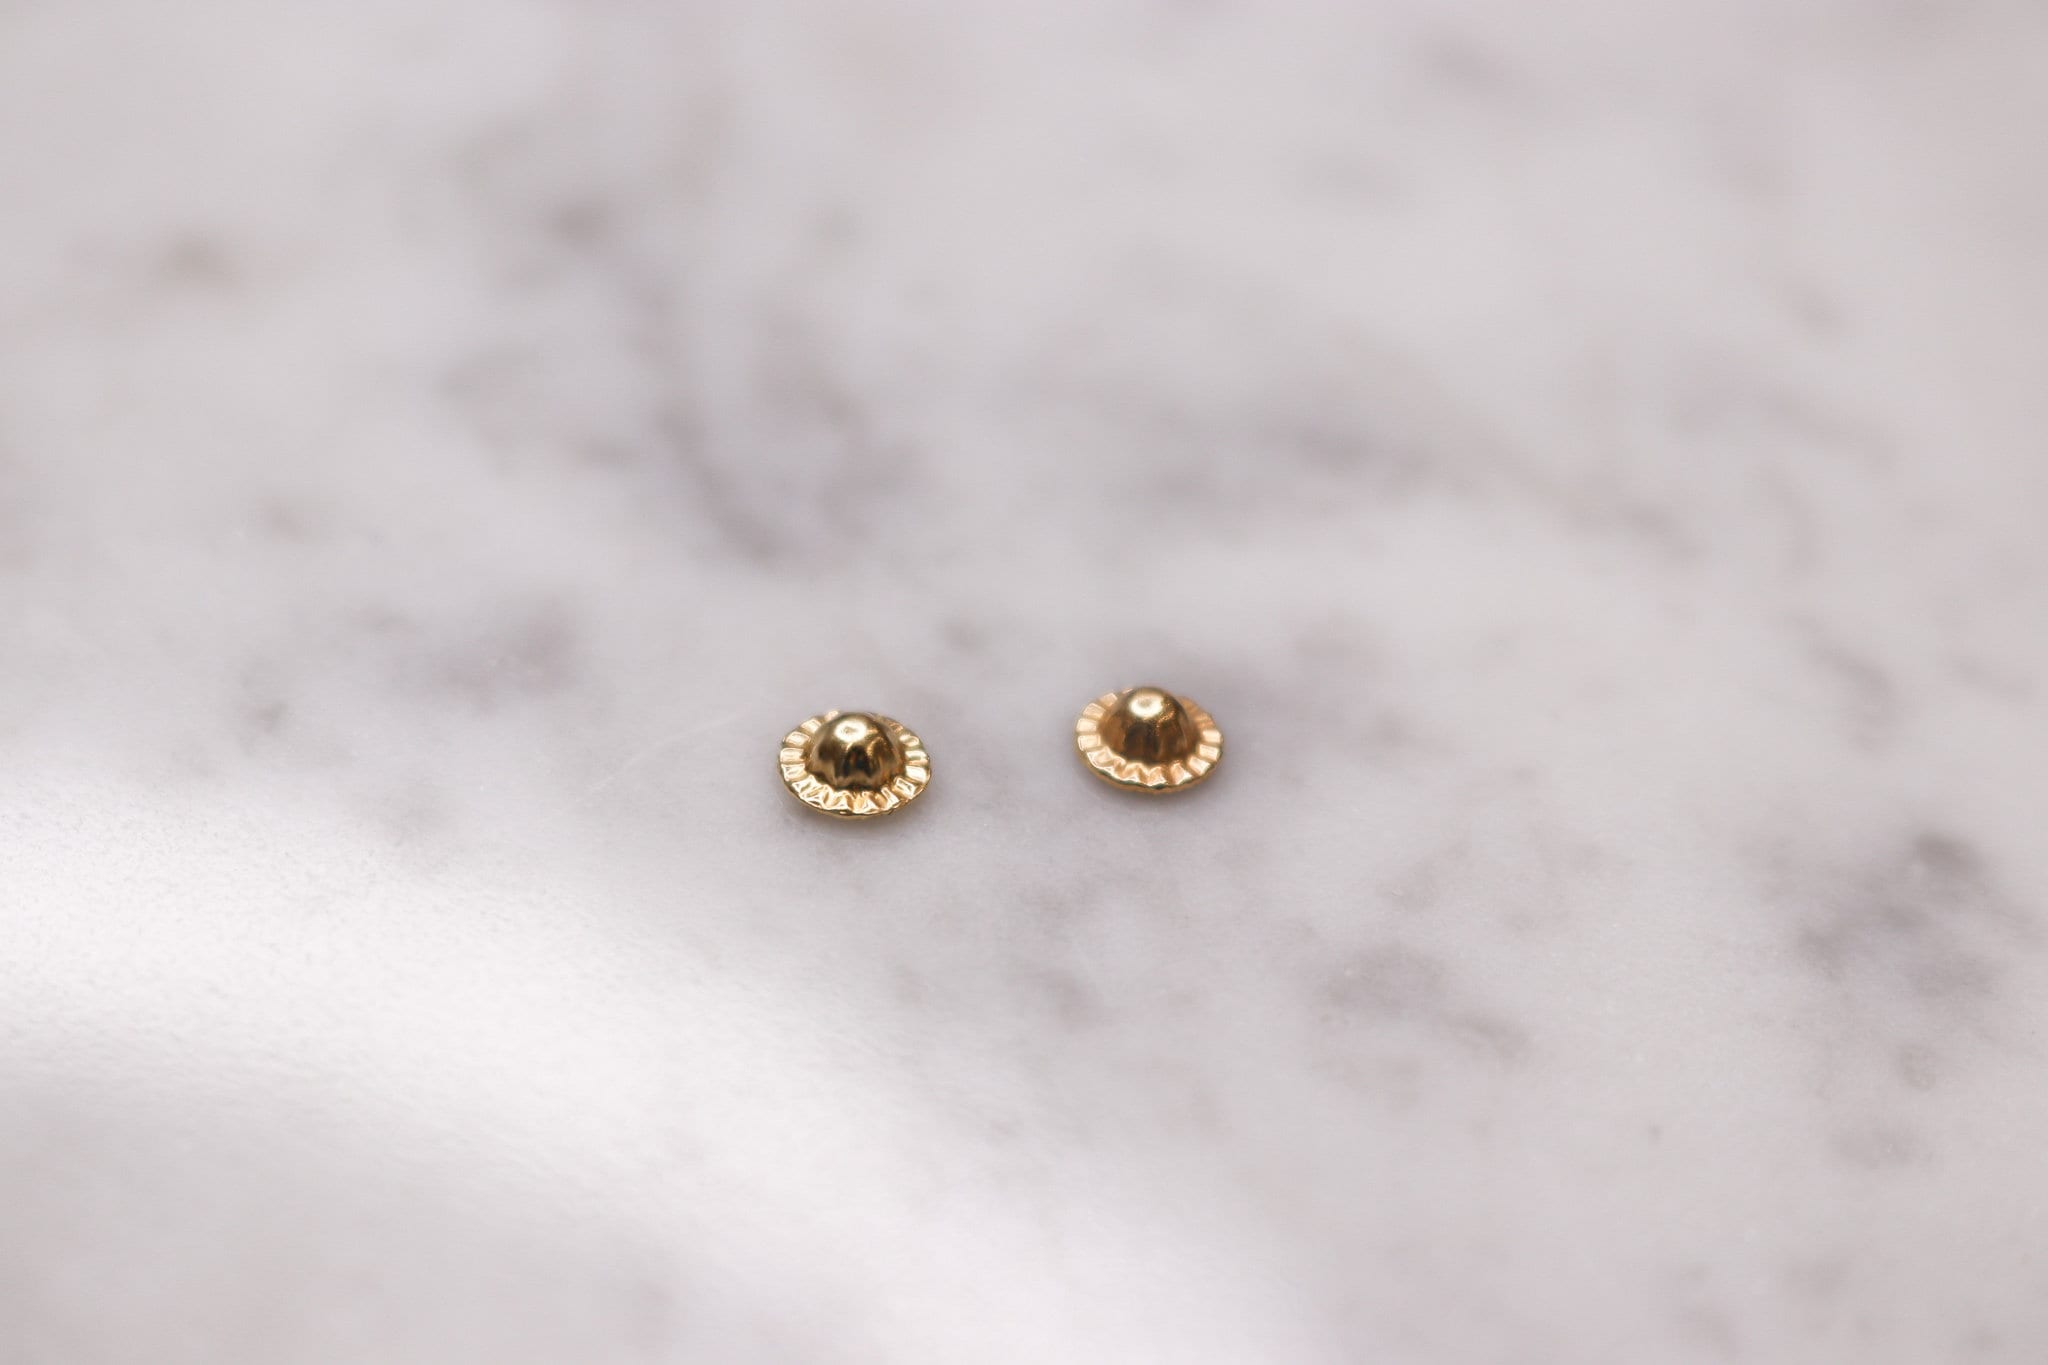  Pair of 14K Yellow Gold Earring Back Replacements, Threaded  Screw On Screw Off, Quality Die Struck, Post Size .039 Pad Size 5.5 mm